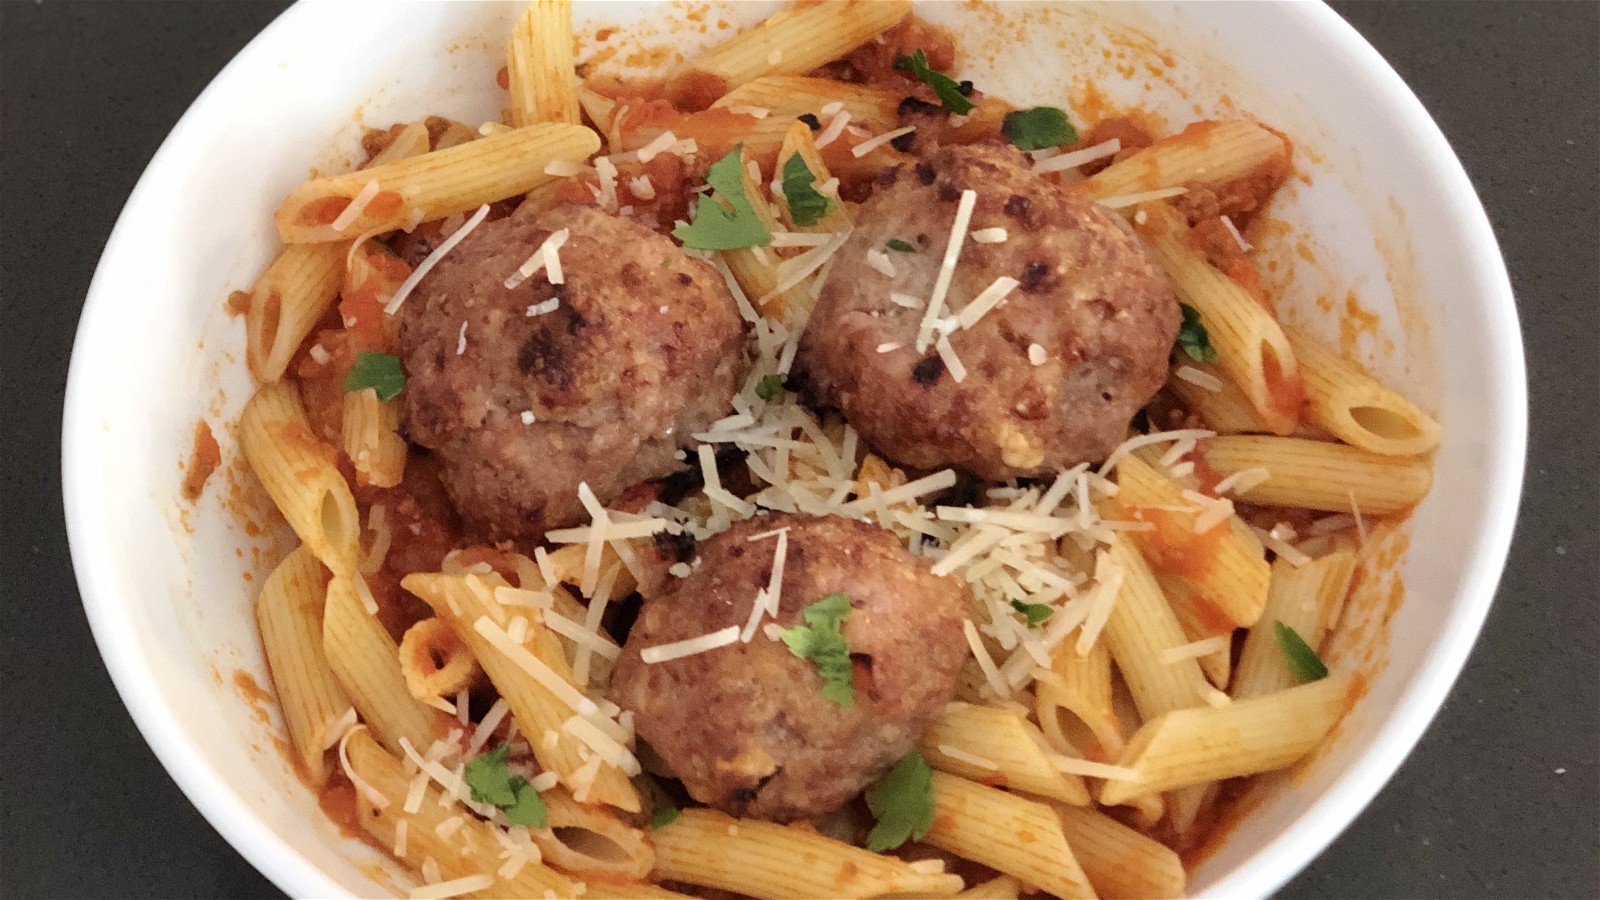 Image of Pork and Goat Cheese Meatballs